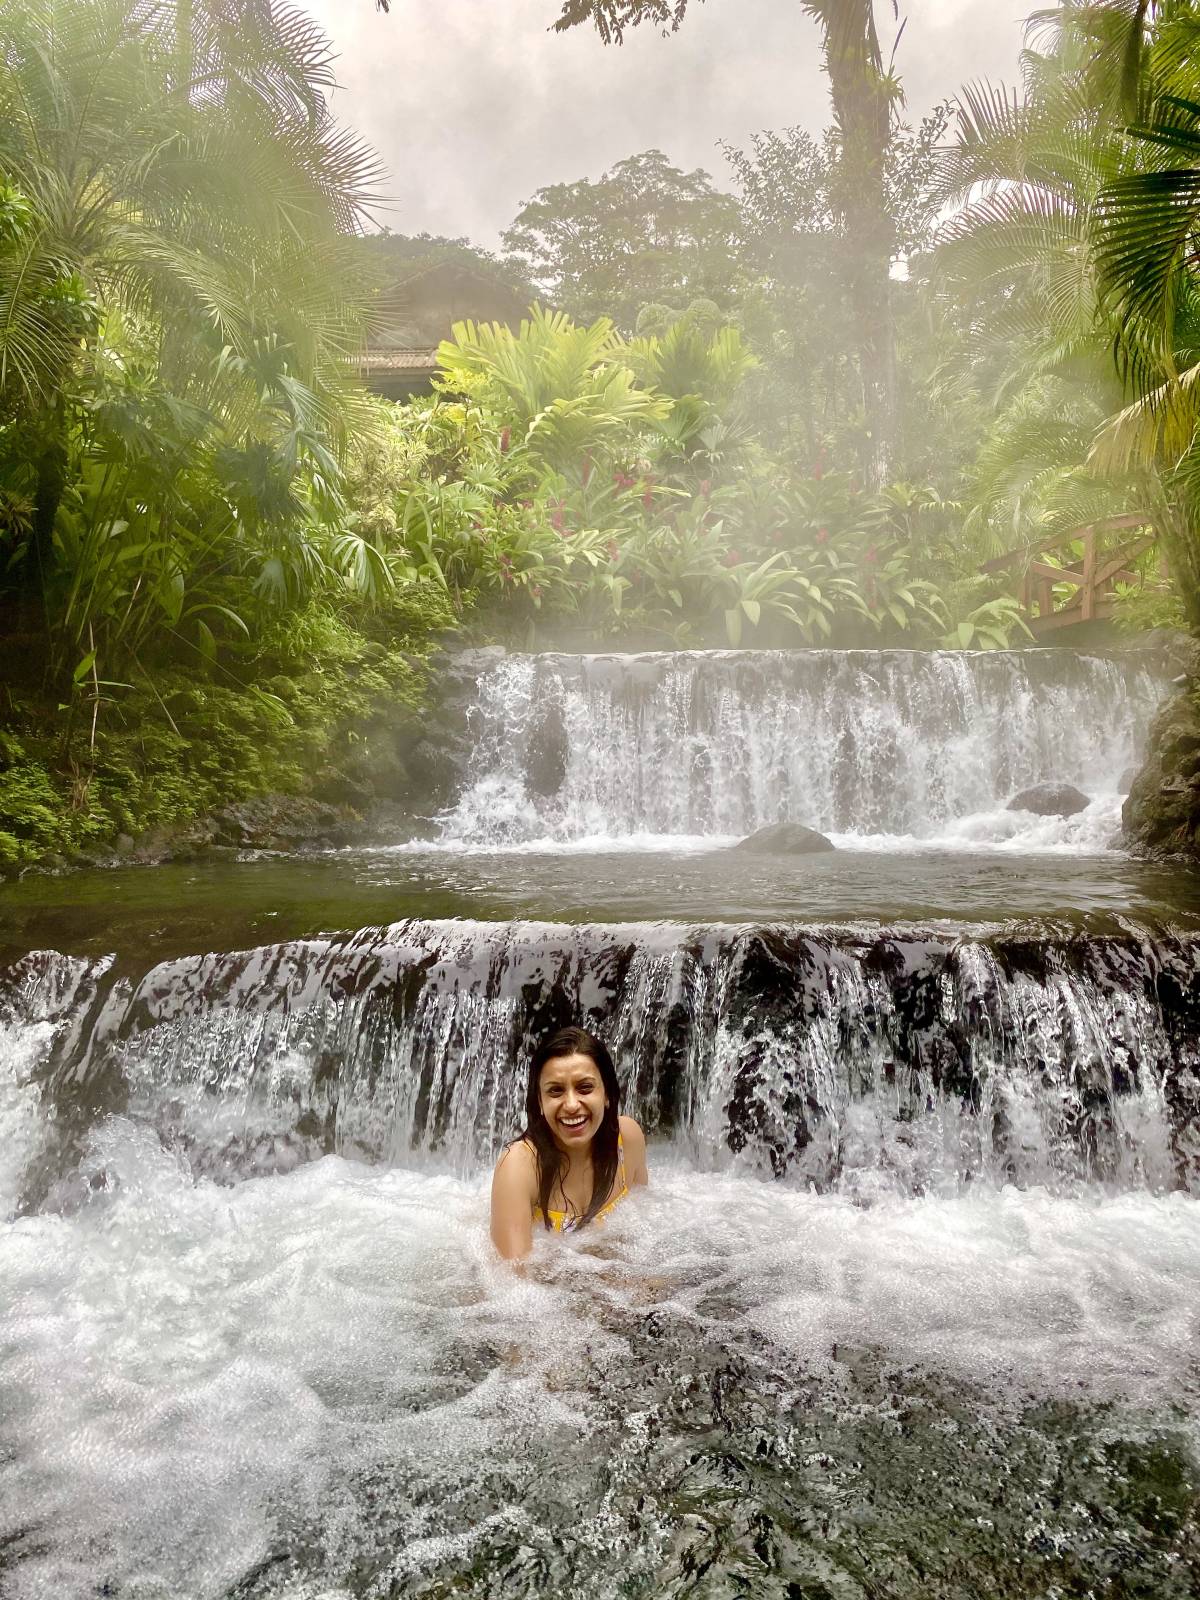 Tabacon resort has the best hot springs